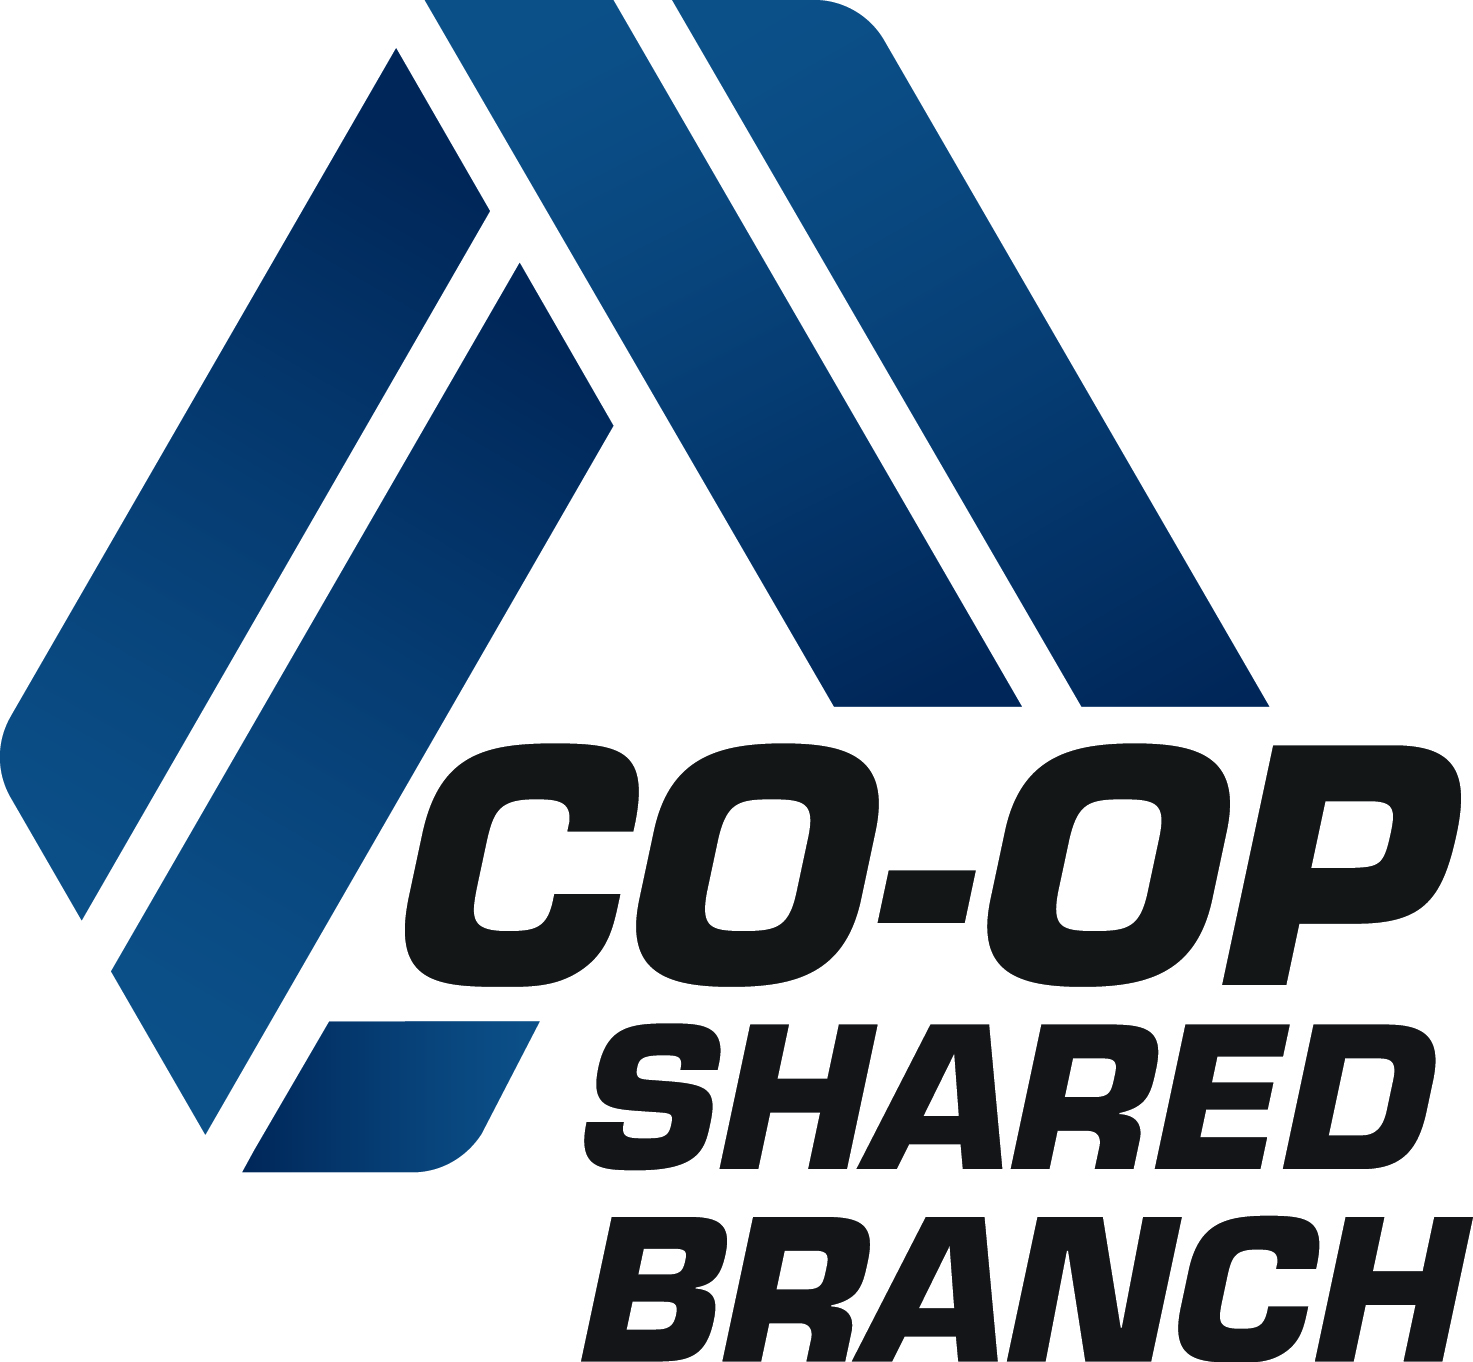 Co-Op Shared Branch Locator